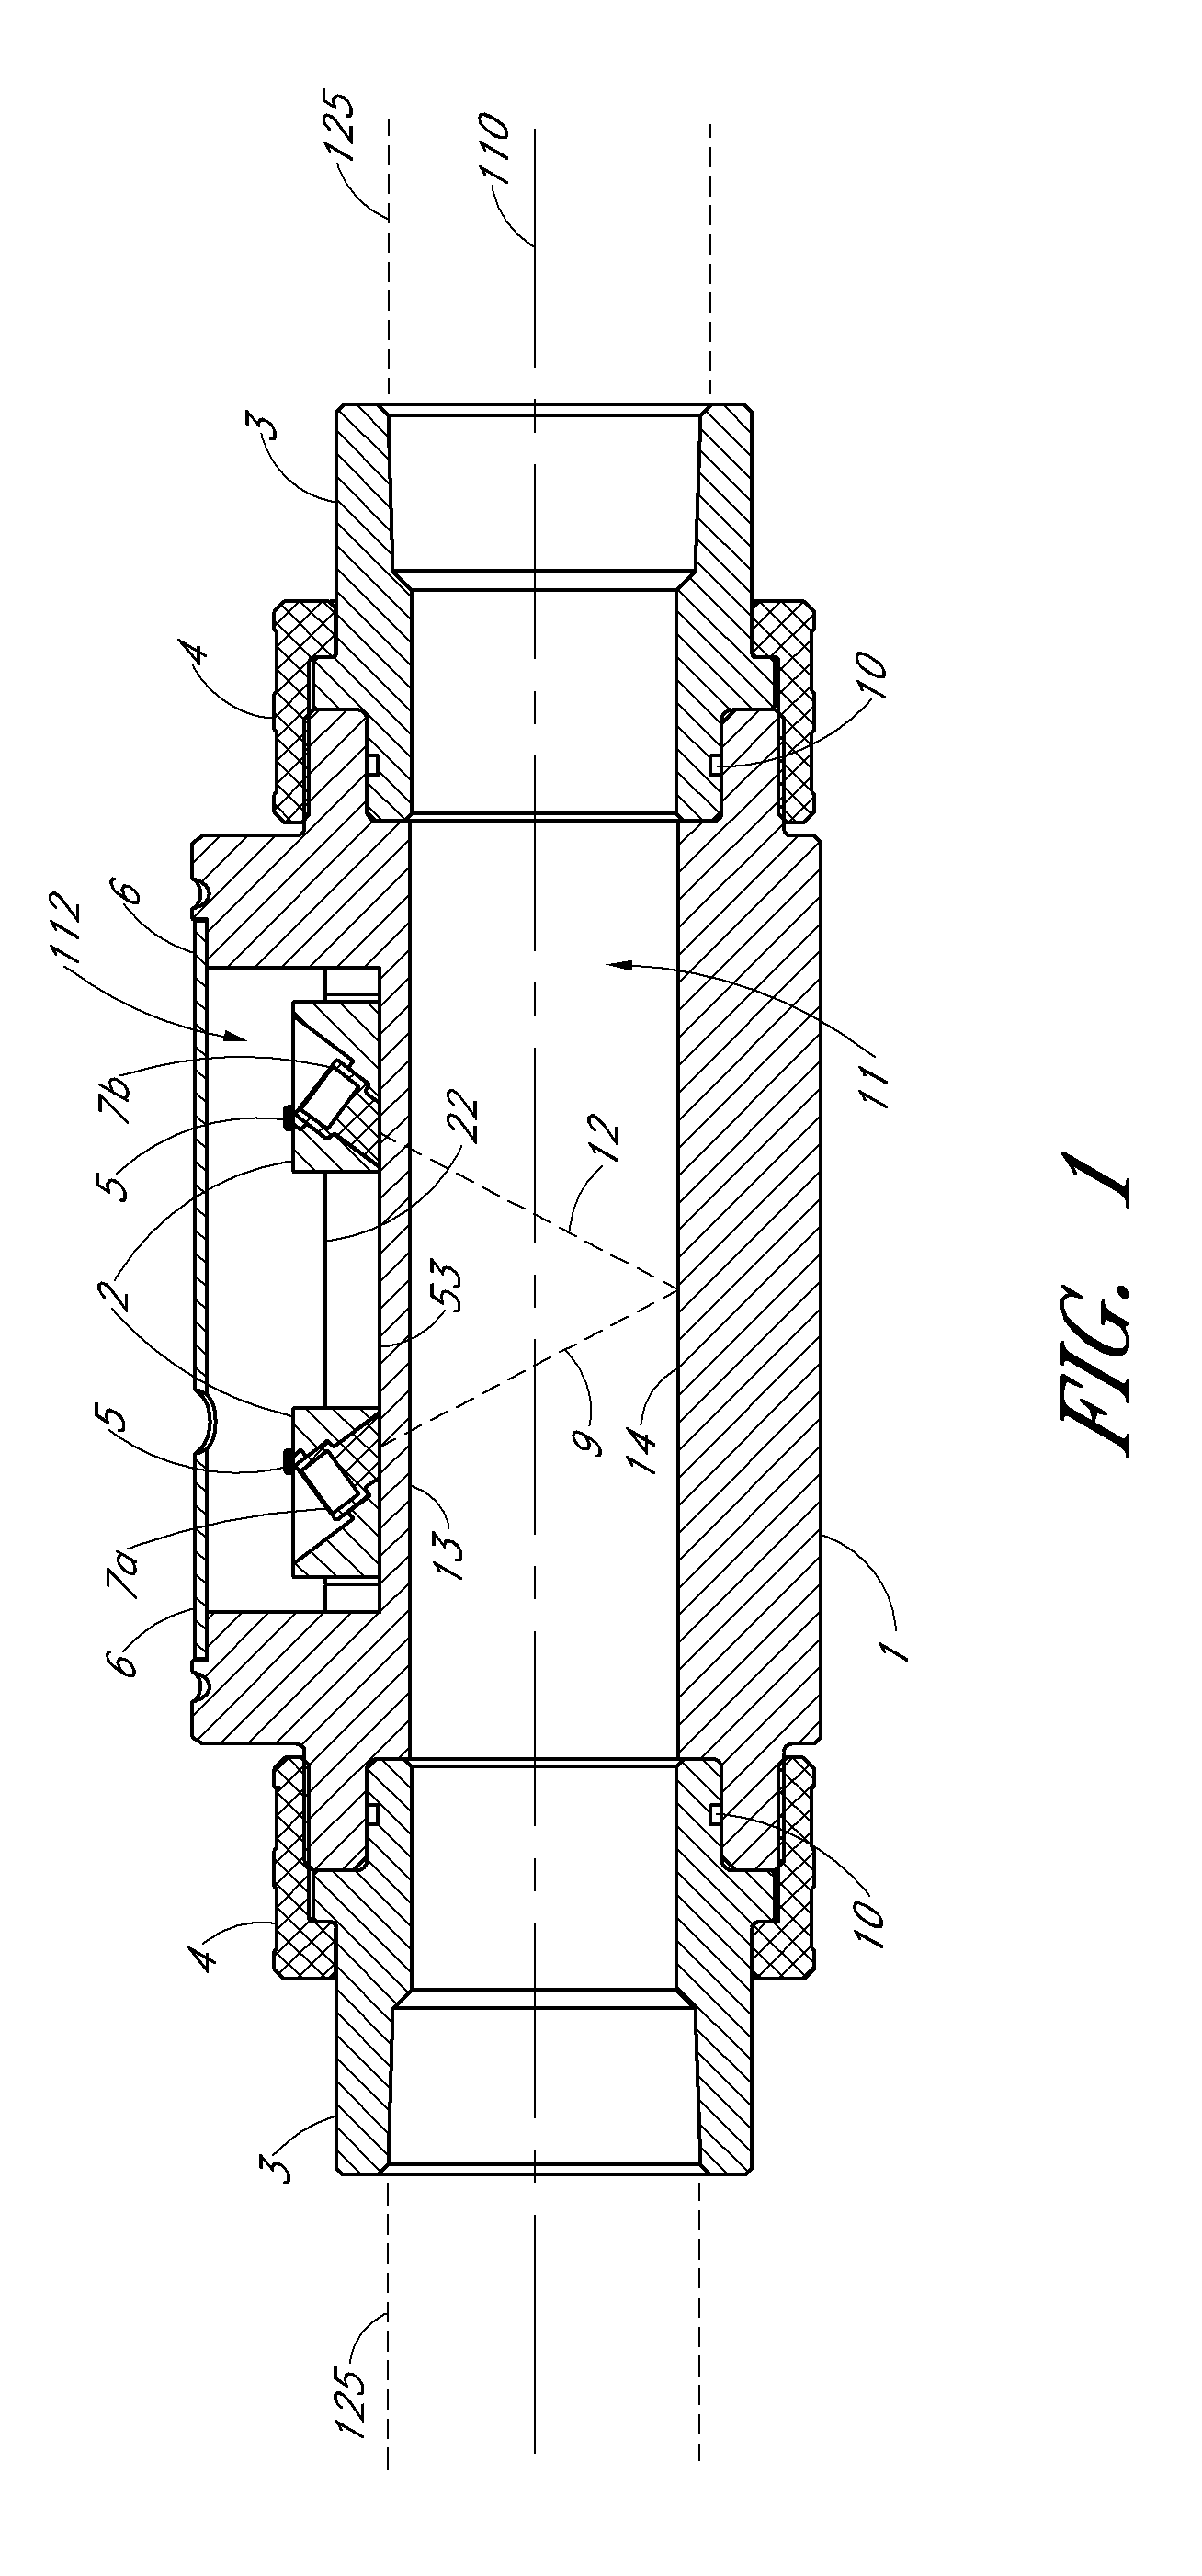 Inline ultrasonic transducer assembly device and methods